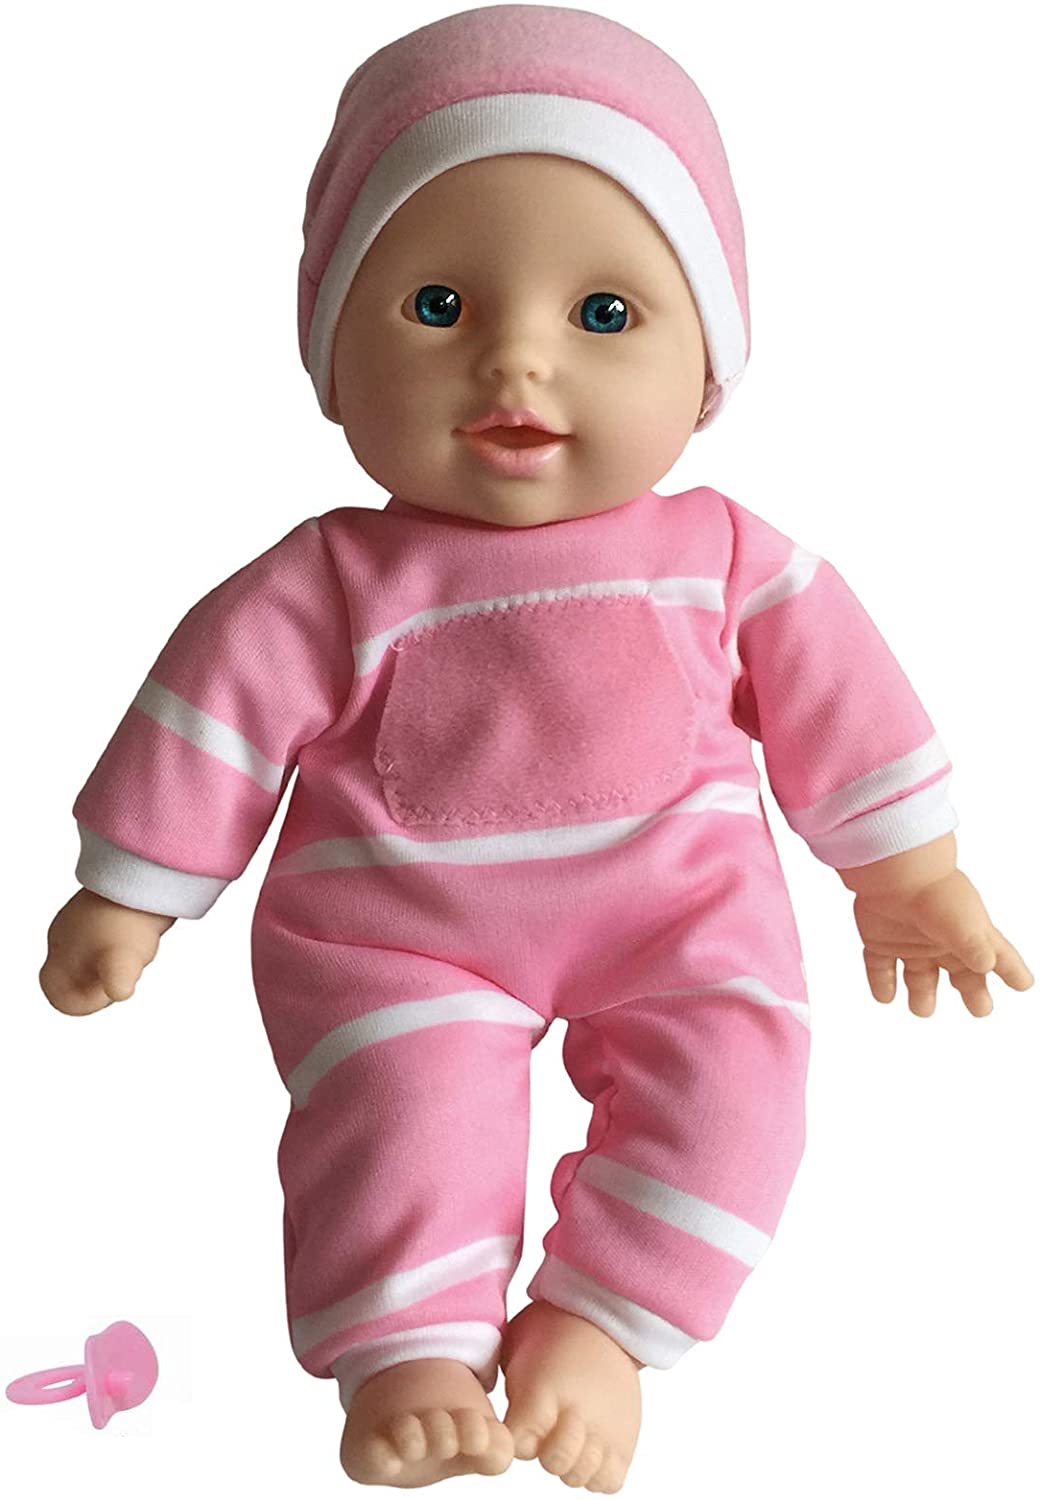 The New York Doll Collection Vinyl Baby Doll For 3-Year-Old Girls, 11-Inch